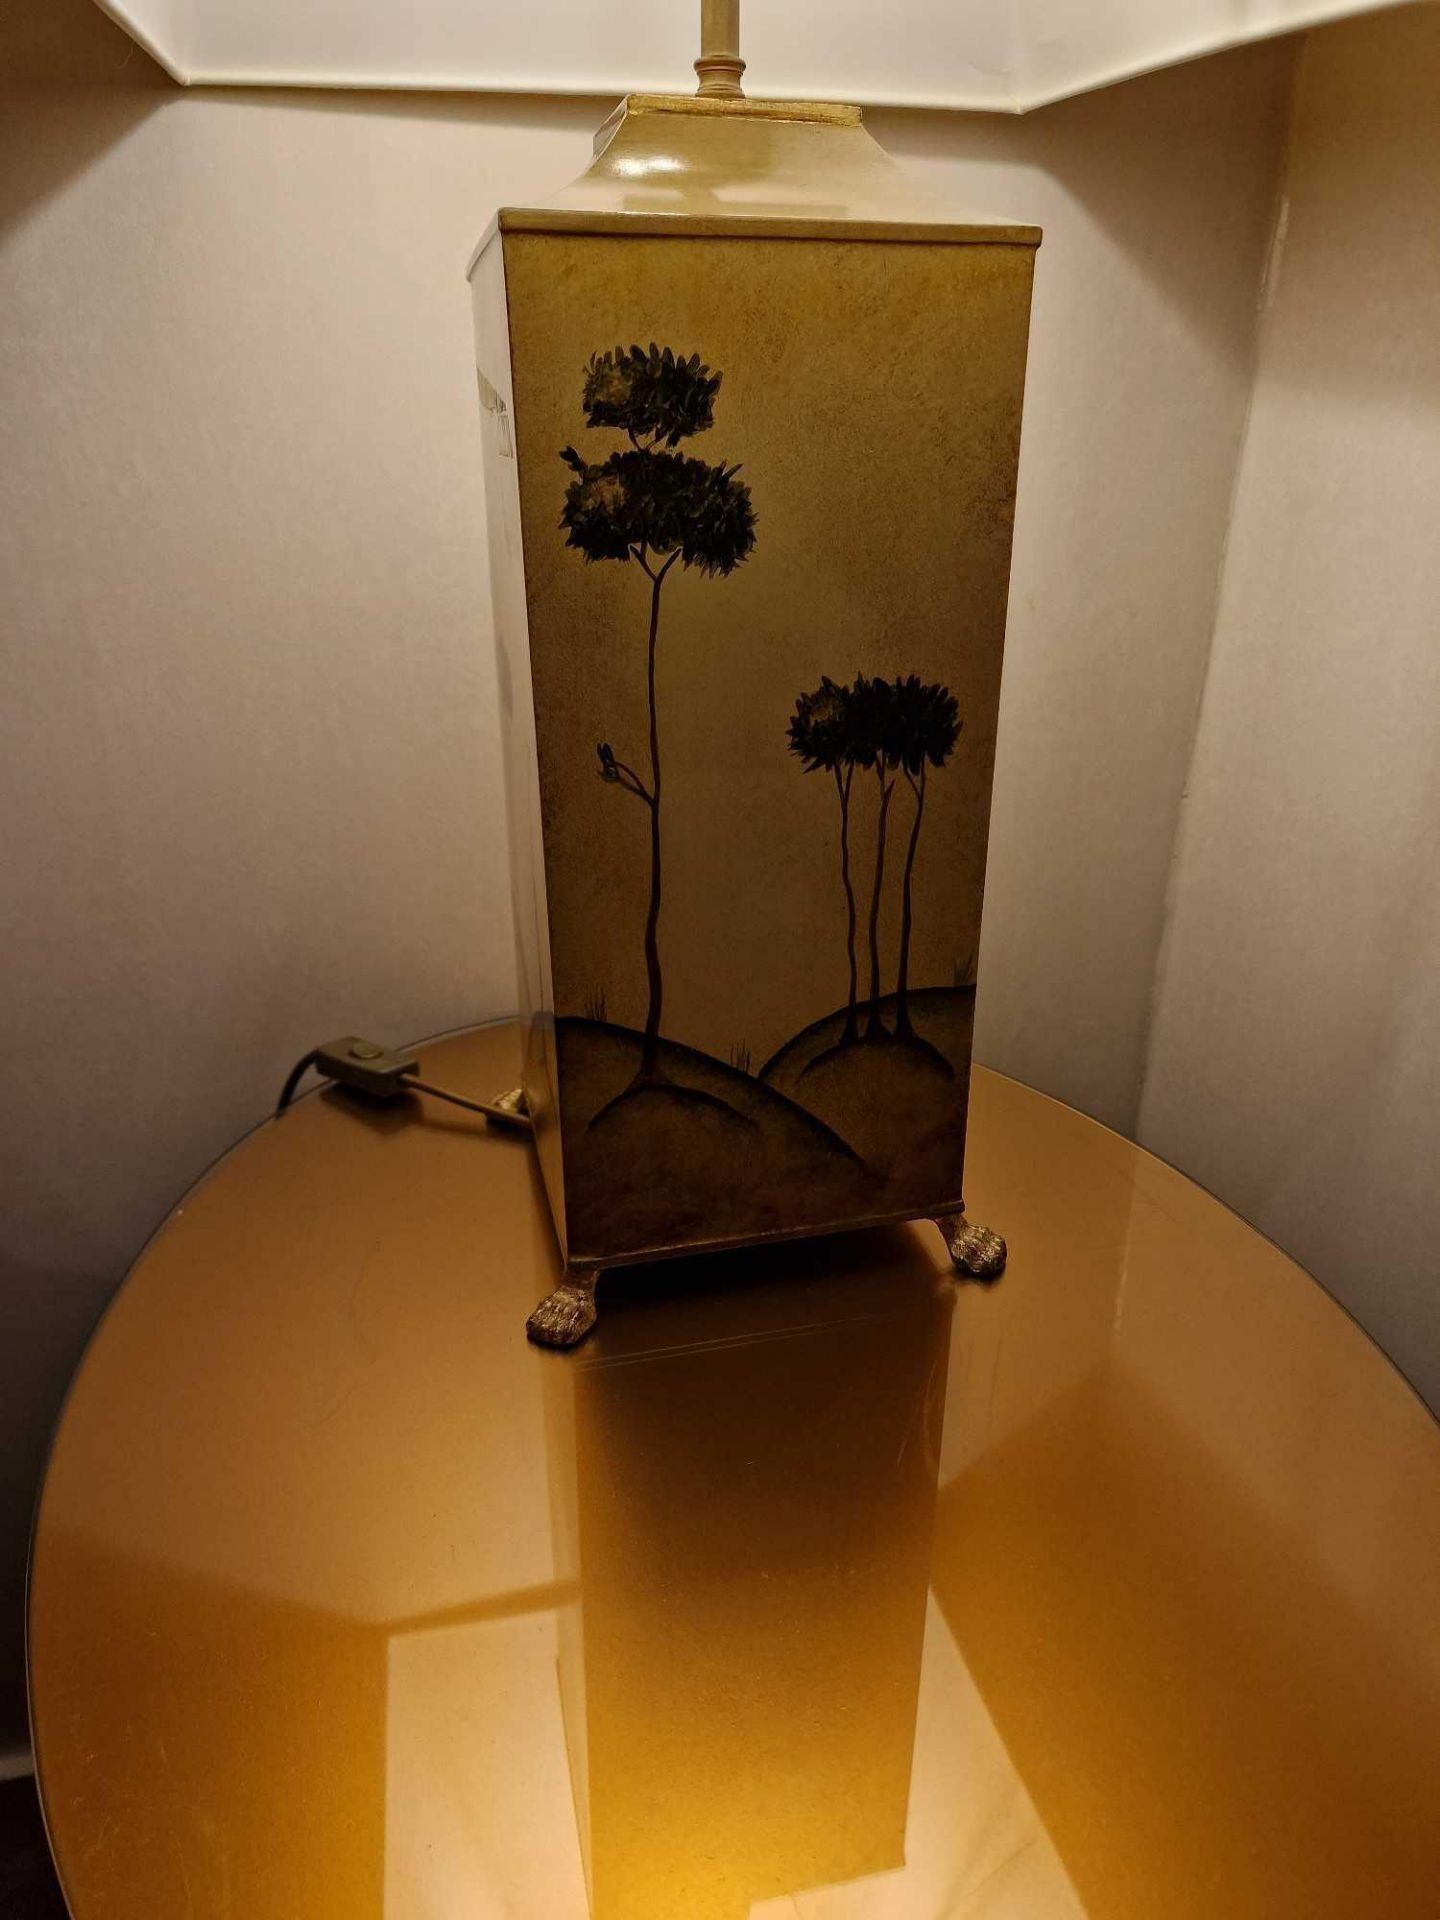 Porta Romana Coral Reef Trees table lamp model TLB/06 toleware lamp with shade 70cm (Room 5E) - Image 2 of 2